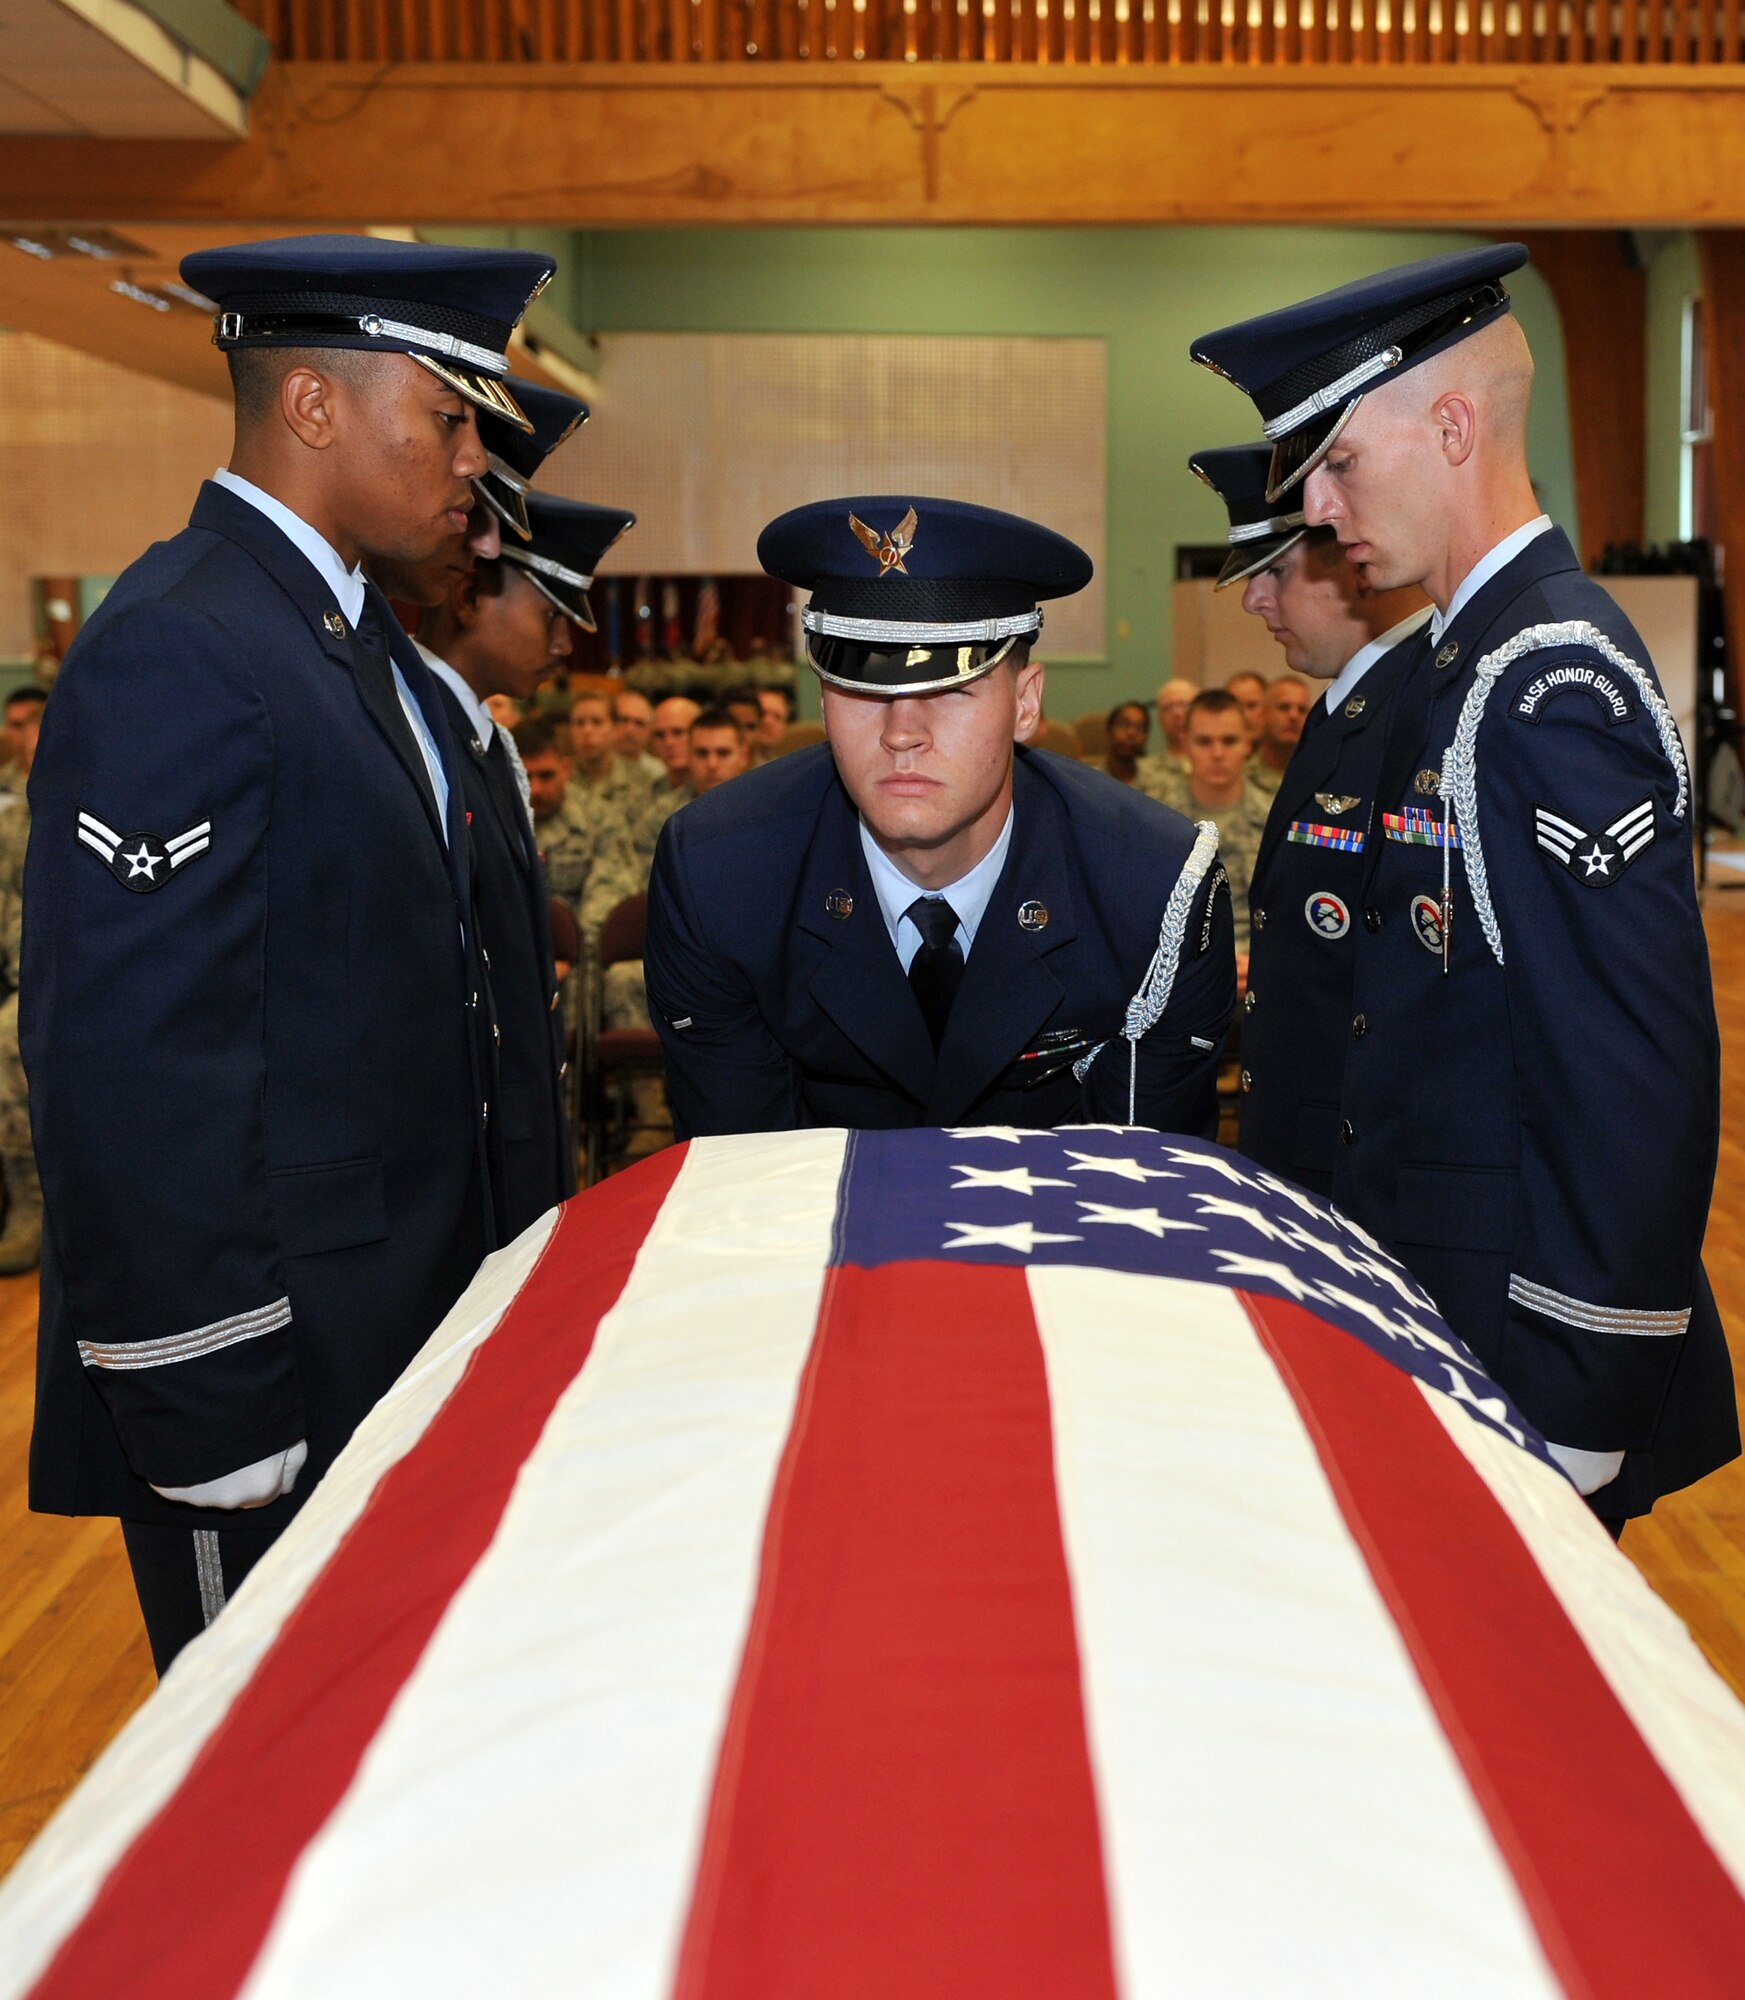 Members from the Little Rock Air Force Base Honor Guard perform a flag folding presentation during their graduation ceremony Sept. 29.  Twenty-six Airmen from the 19th Airlift Wing; 314th Airlift Wing; 189th Airlift Wing; and 188th Fighter Wing, Fort Smith, Ark.; graduated from the training conducted by a Mobile Training Team from Bolling Air Force Base, D.C.  (U.S. Air Force photo by Staff Sgt. Chris Willis)